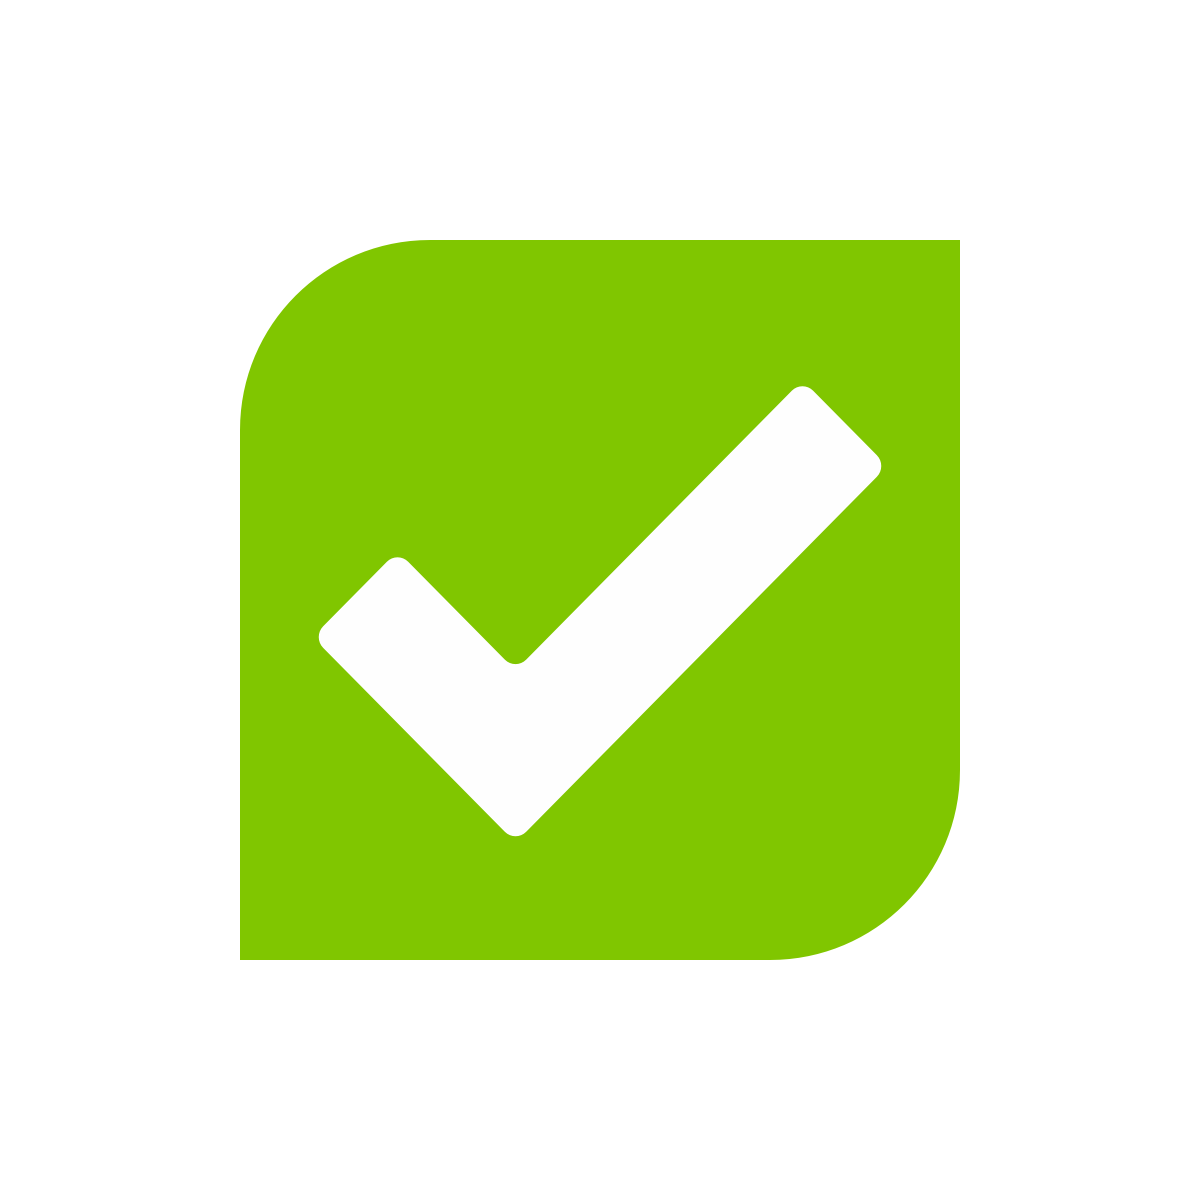 a green square with a check mark on it